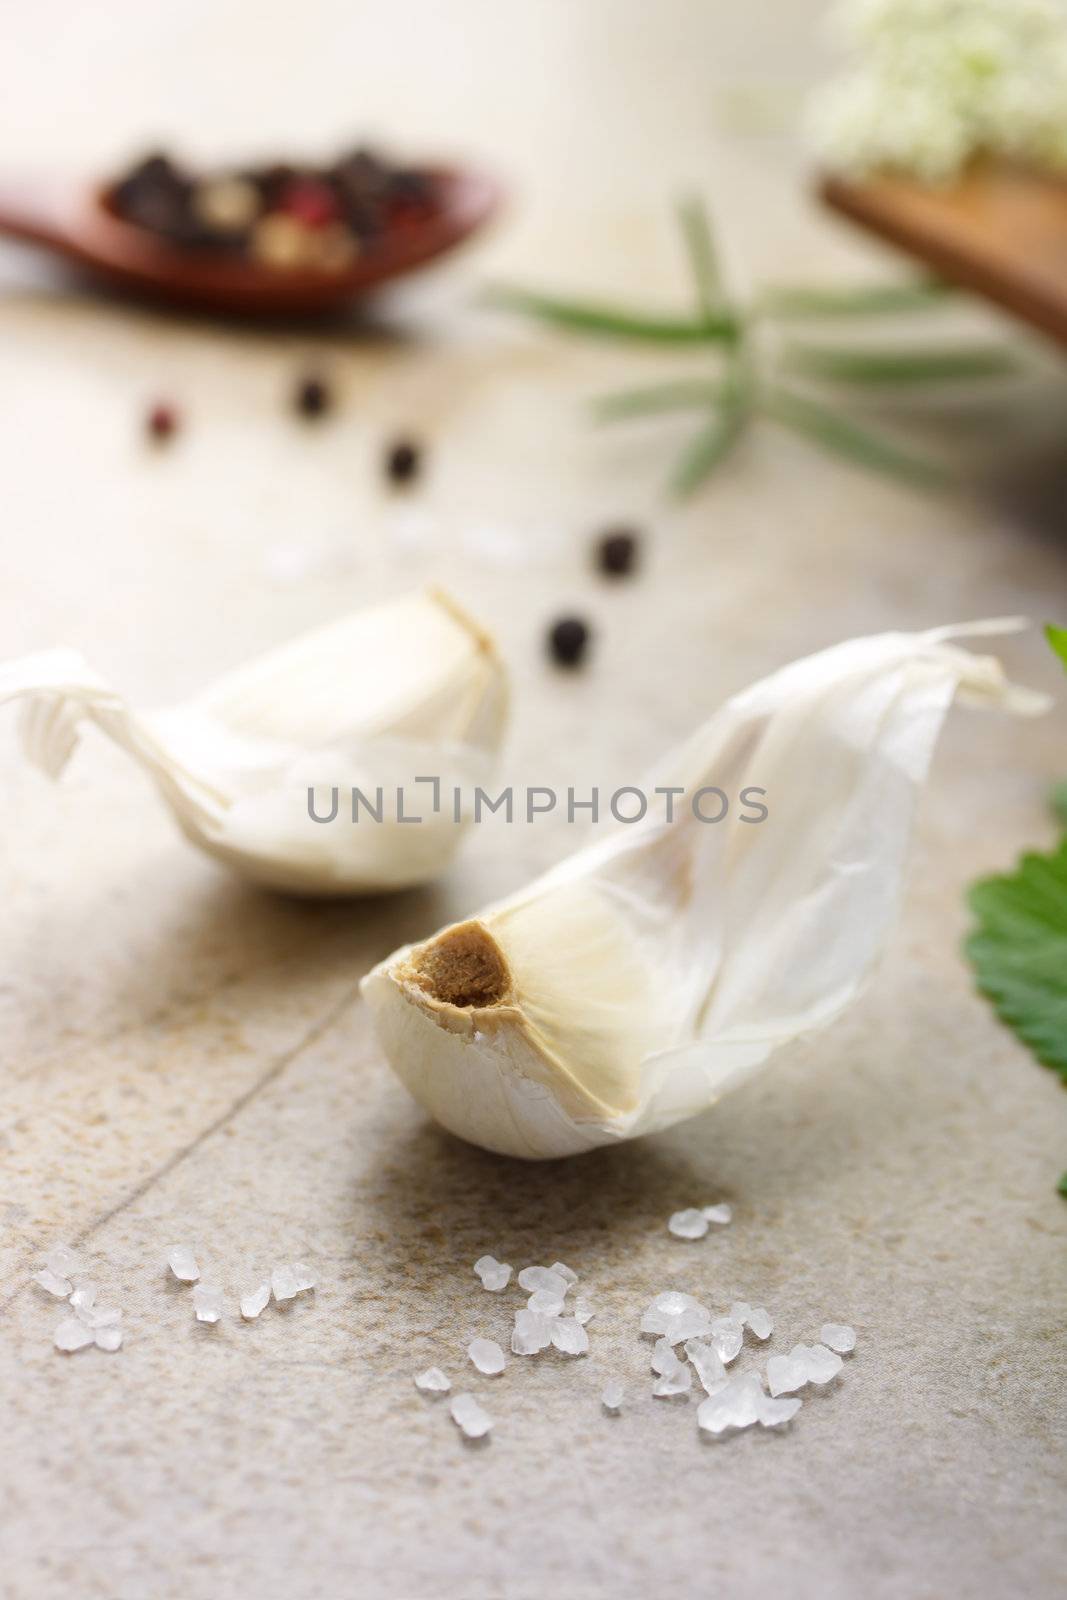 Garlic cloves with peppercorn, salt, rosemary and mint